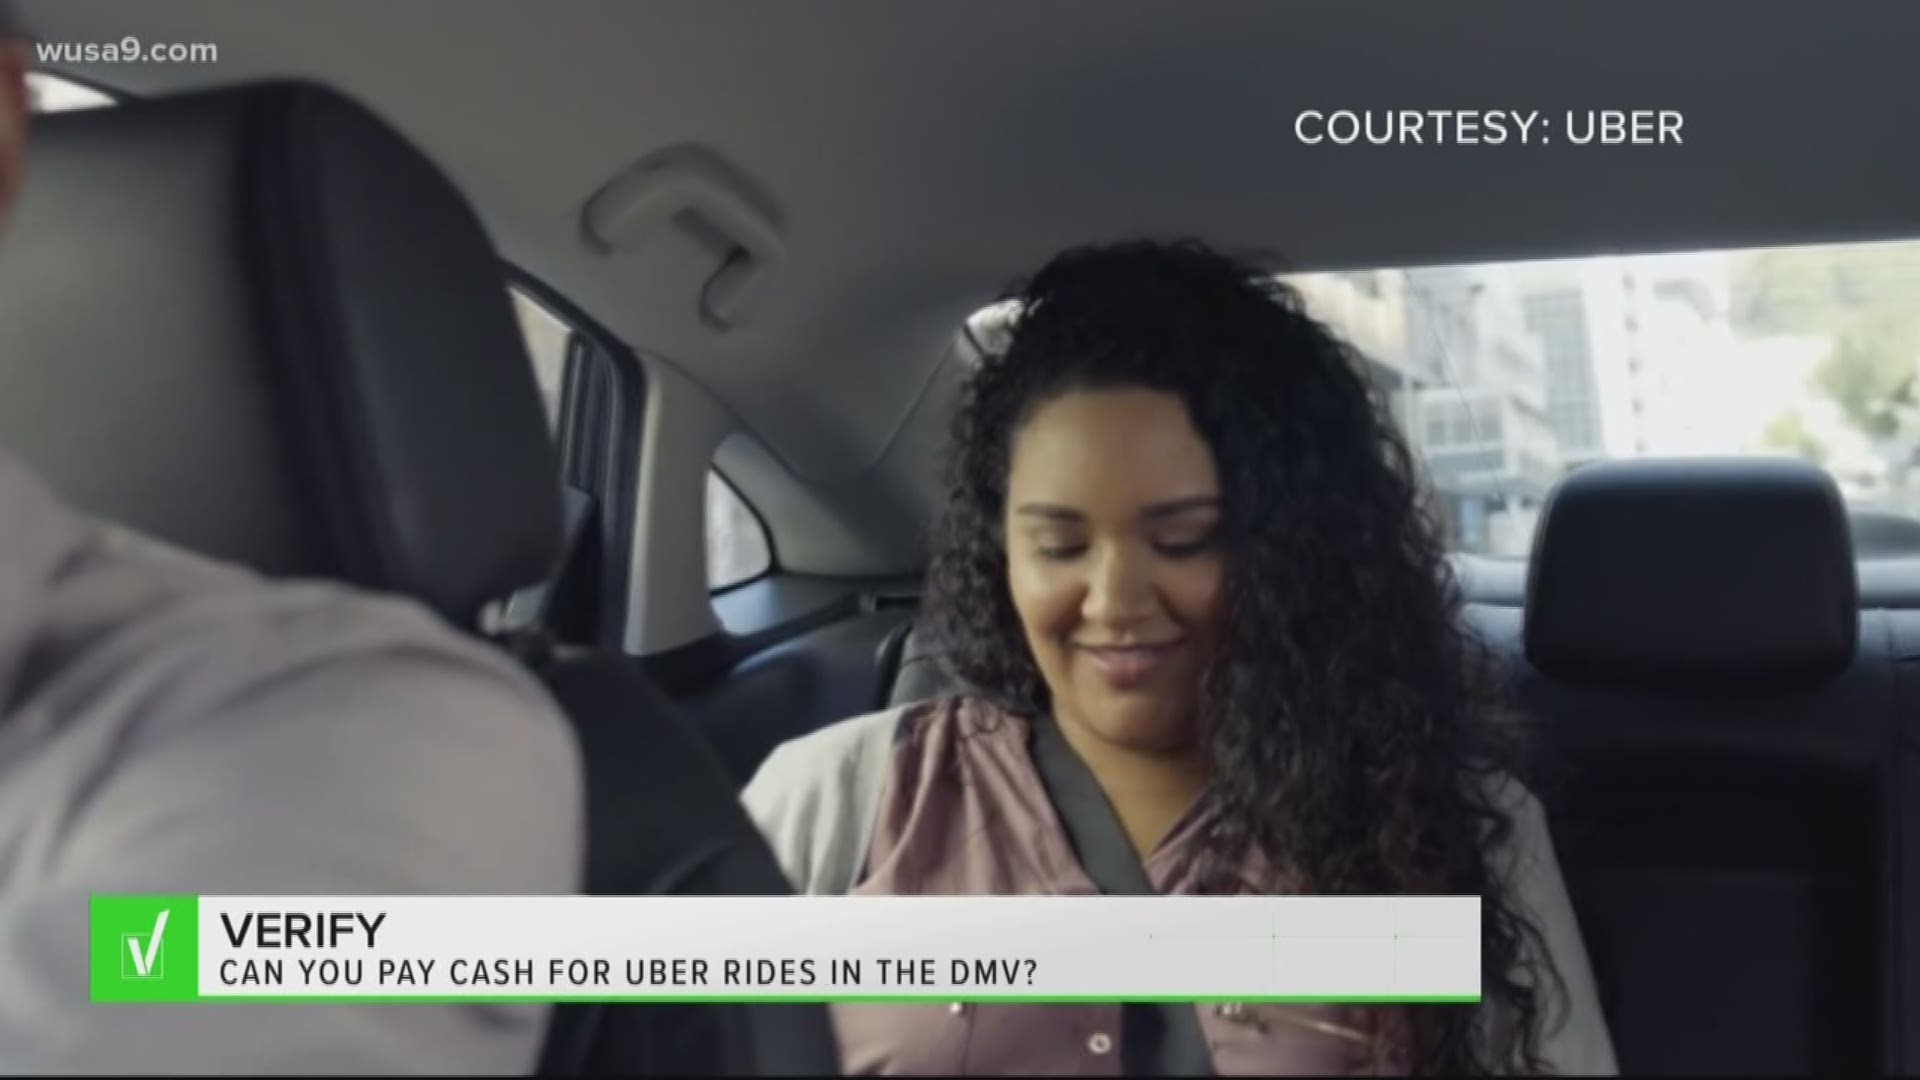 A conversation about paying ride-share drivers the old-fashioned way started after an Uber commercial was uploaded to Youtube.